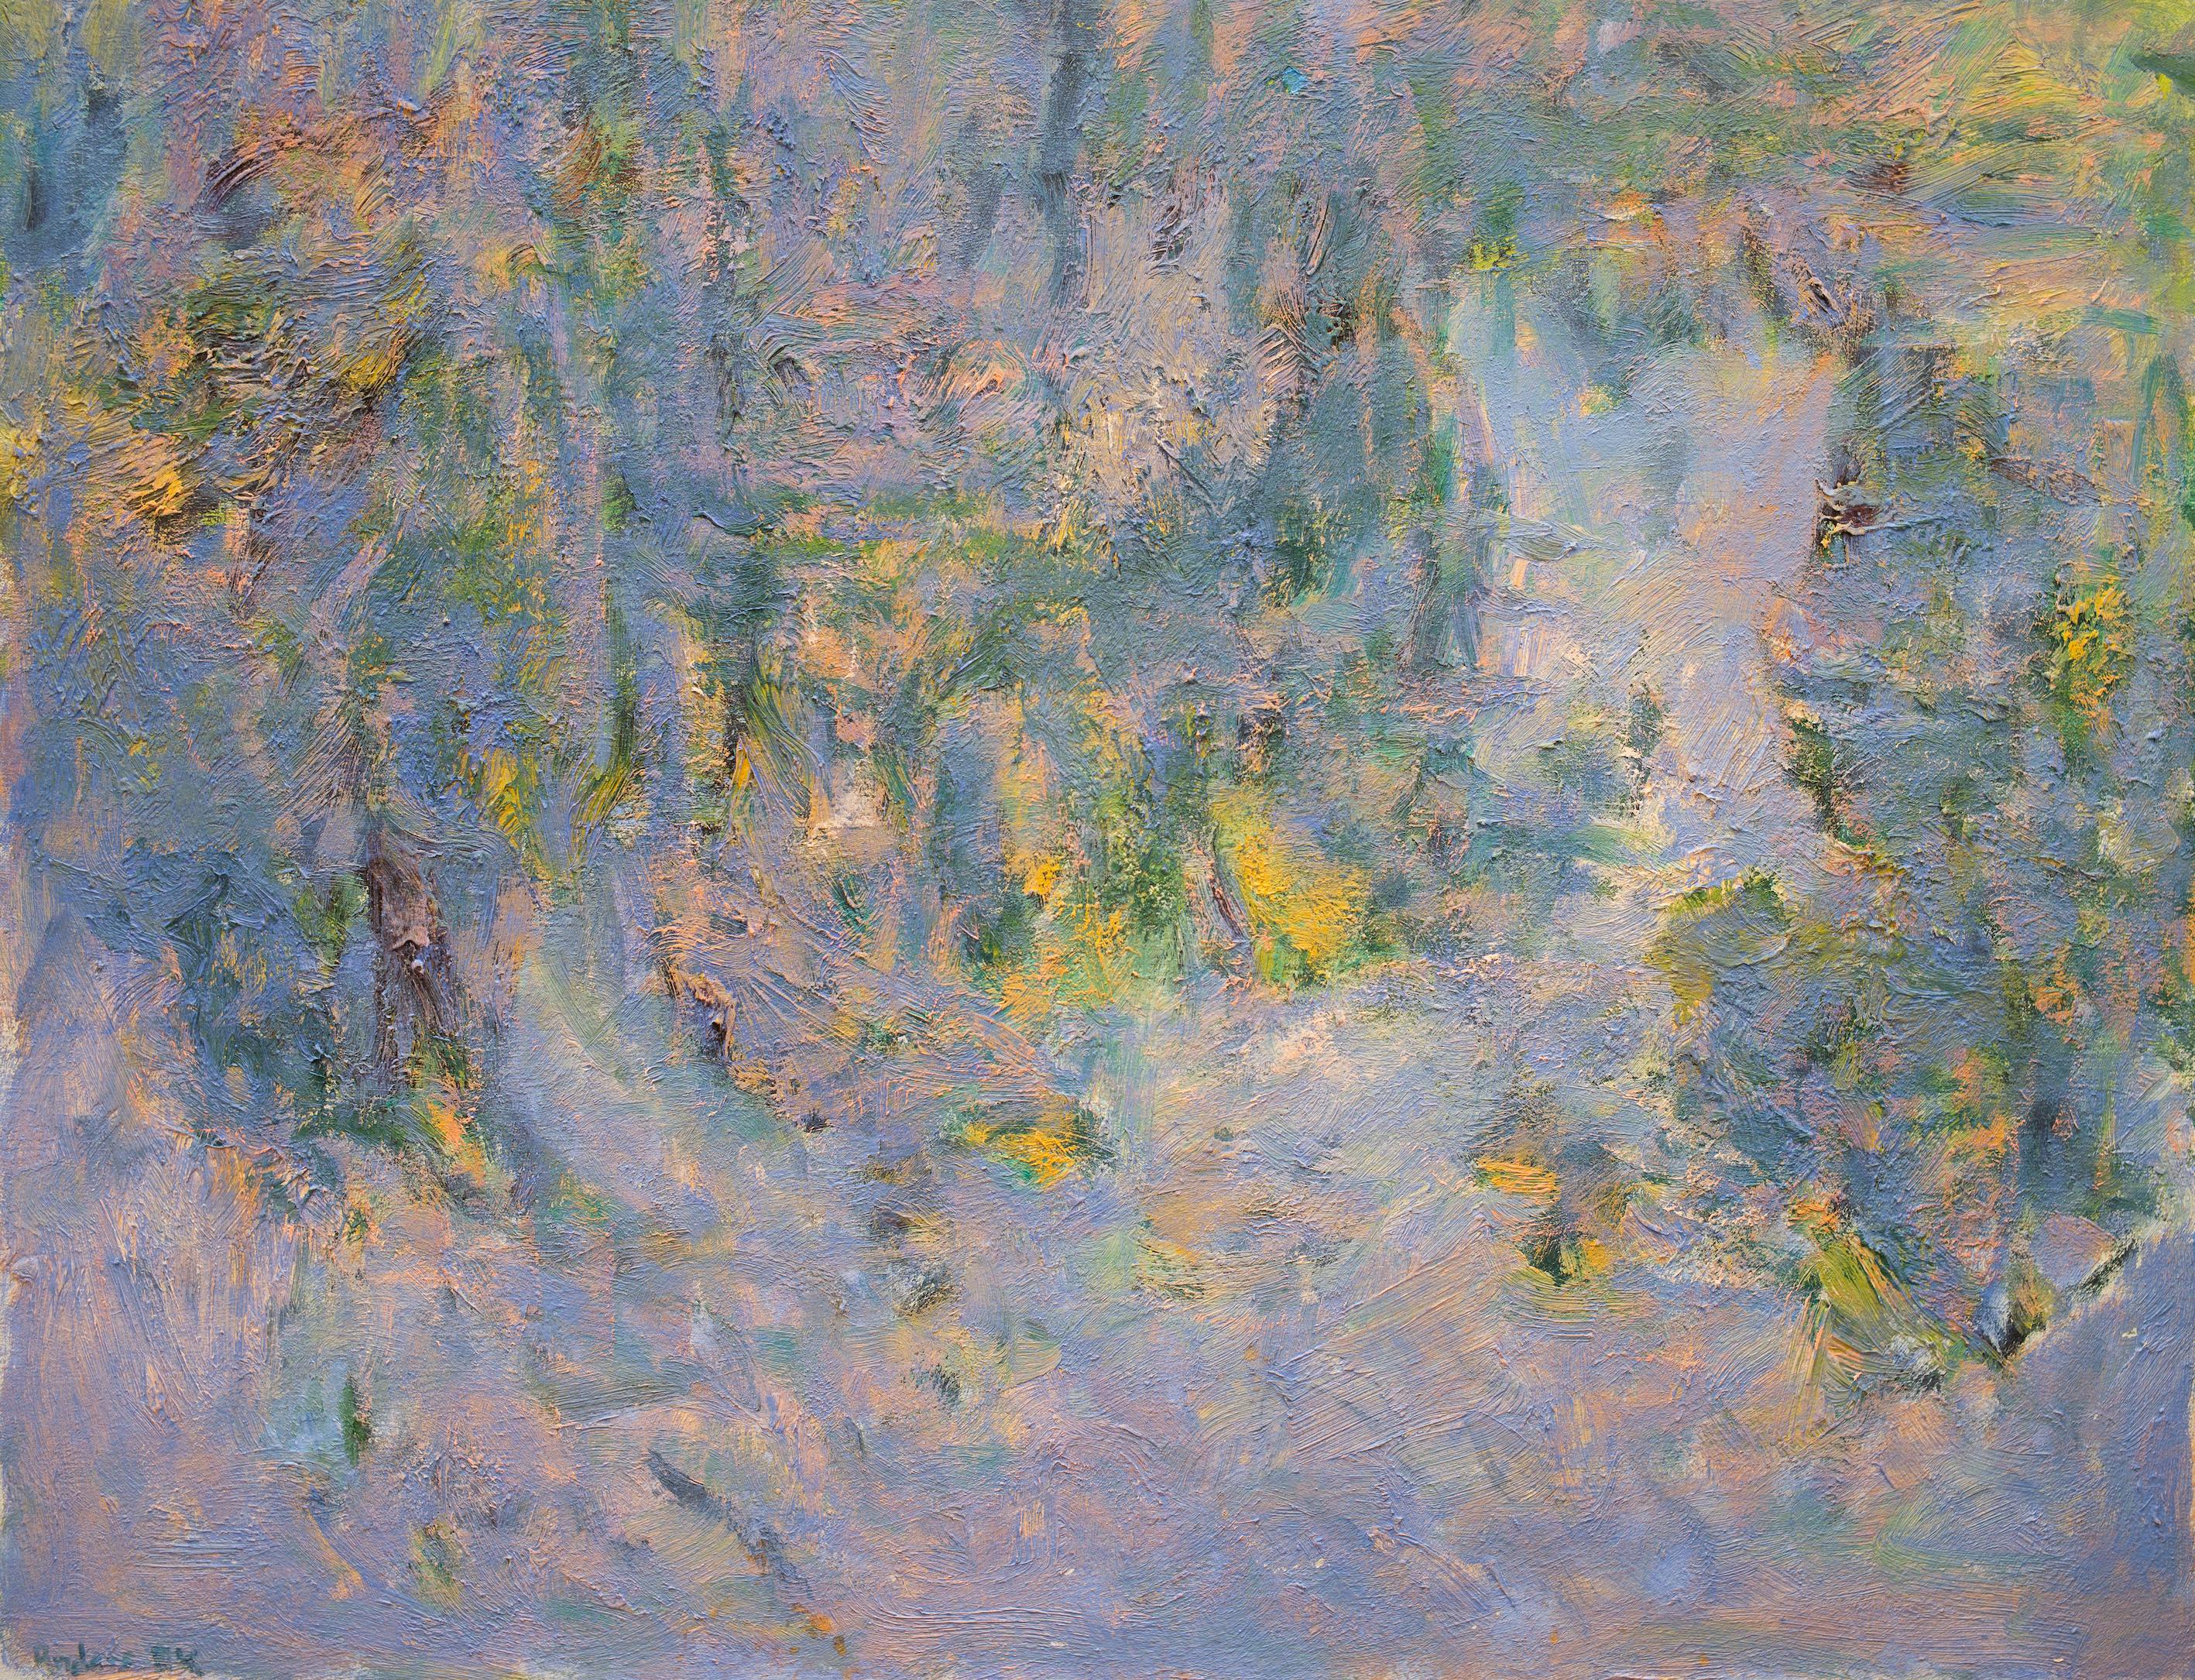 Anders Ek (Born 1952) Sweden

Water Reflections (Hompage Monet)

painted 1994
canvas 19.68 x 25.19 inches (50 x 64 cm)
frame 20.27 x 25.78 inches (51.5 x 65.5 cm)
signed Anders Ek
oil on canvas

